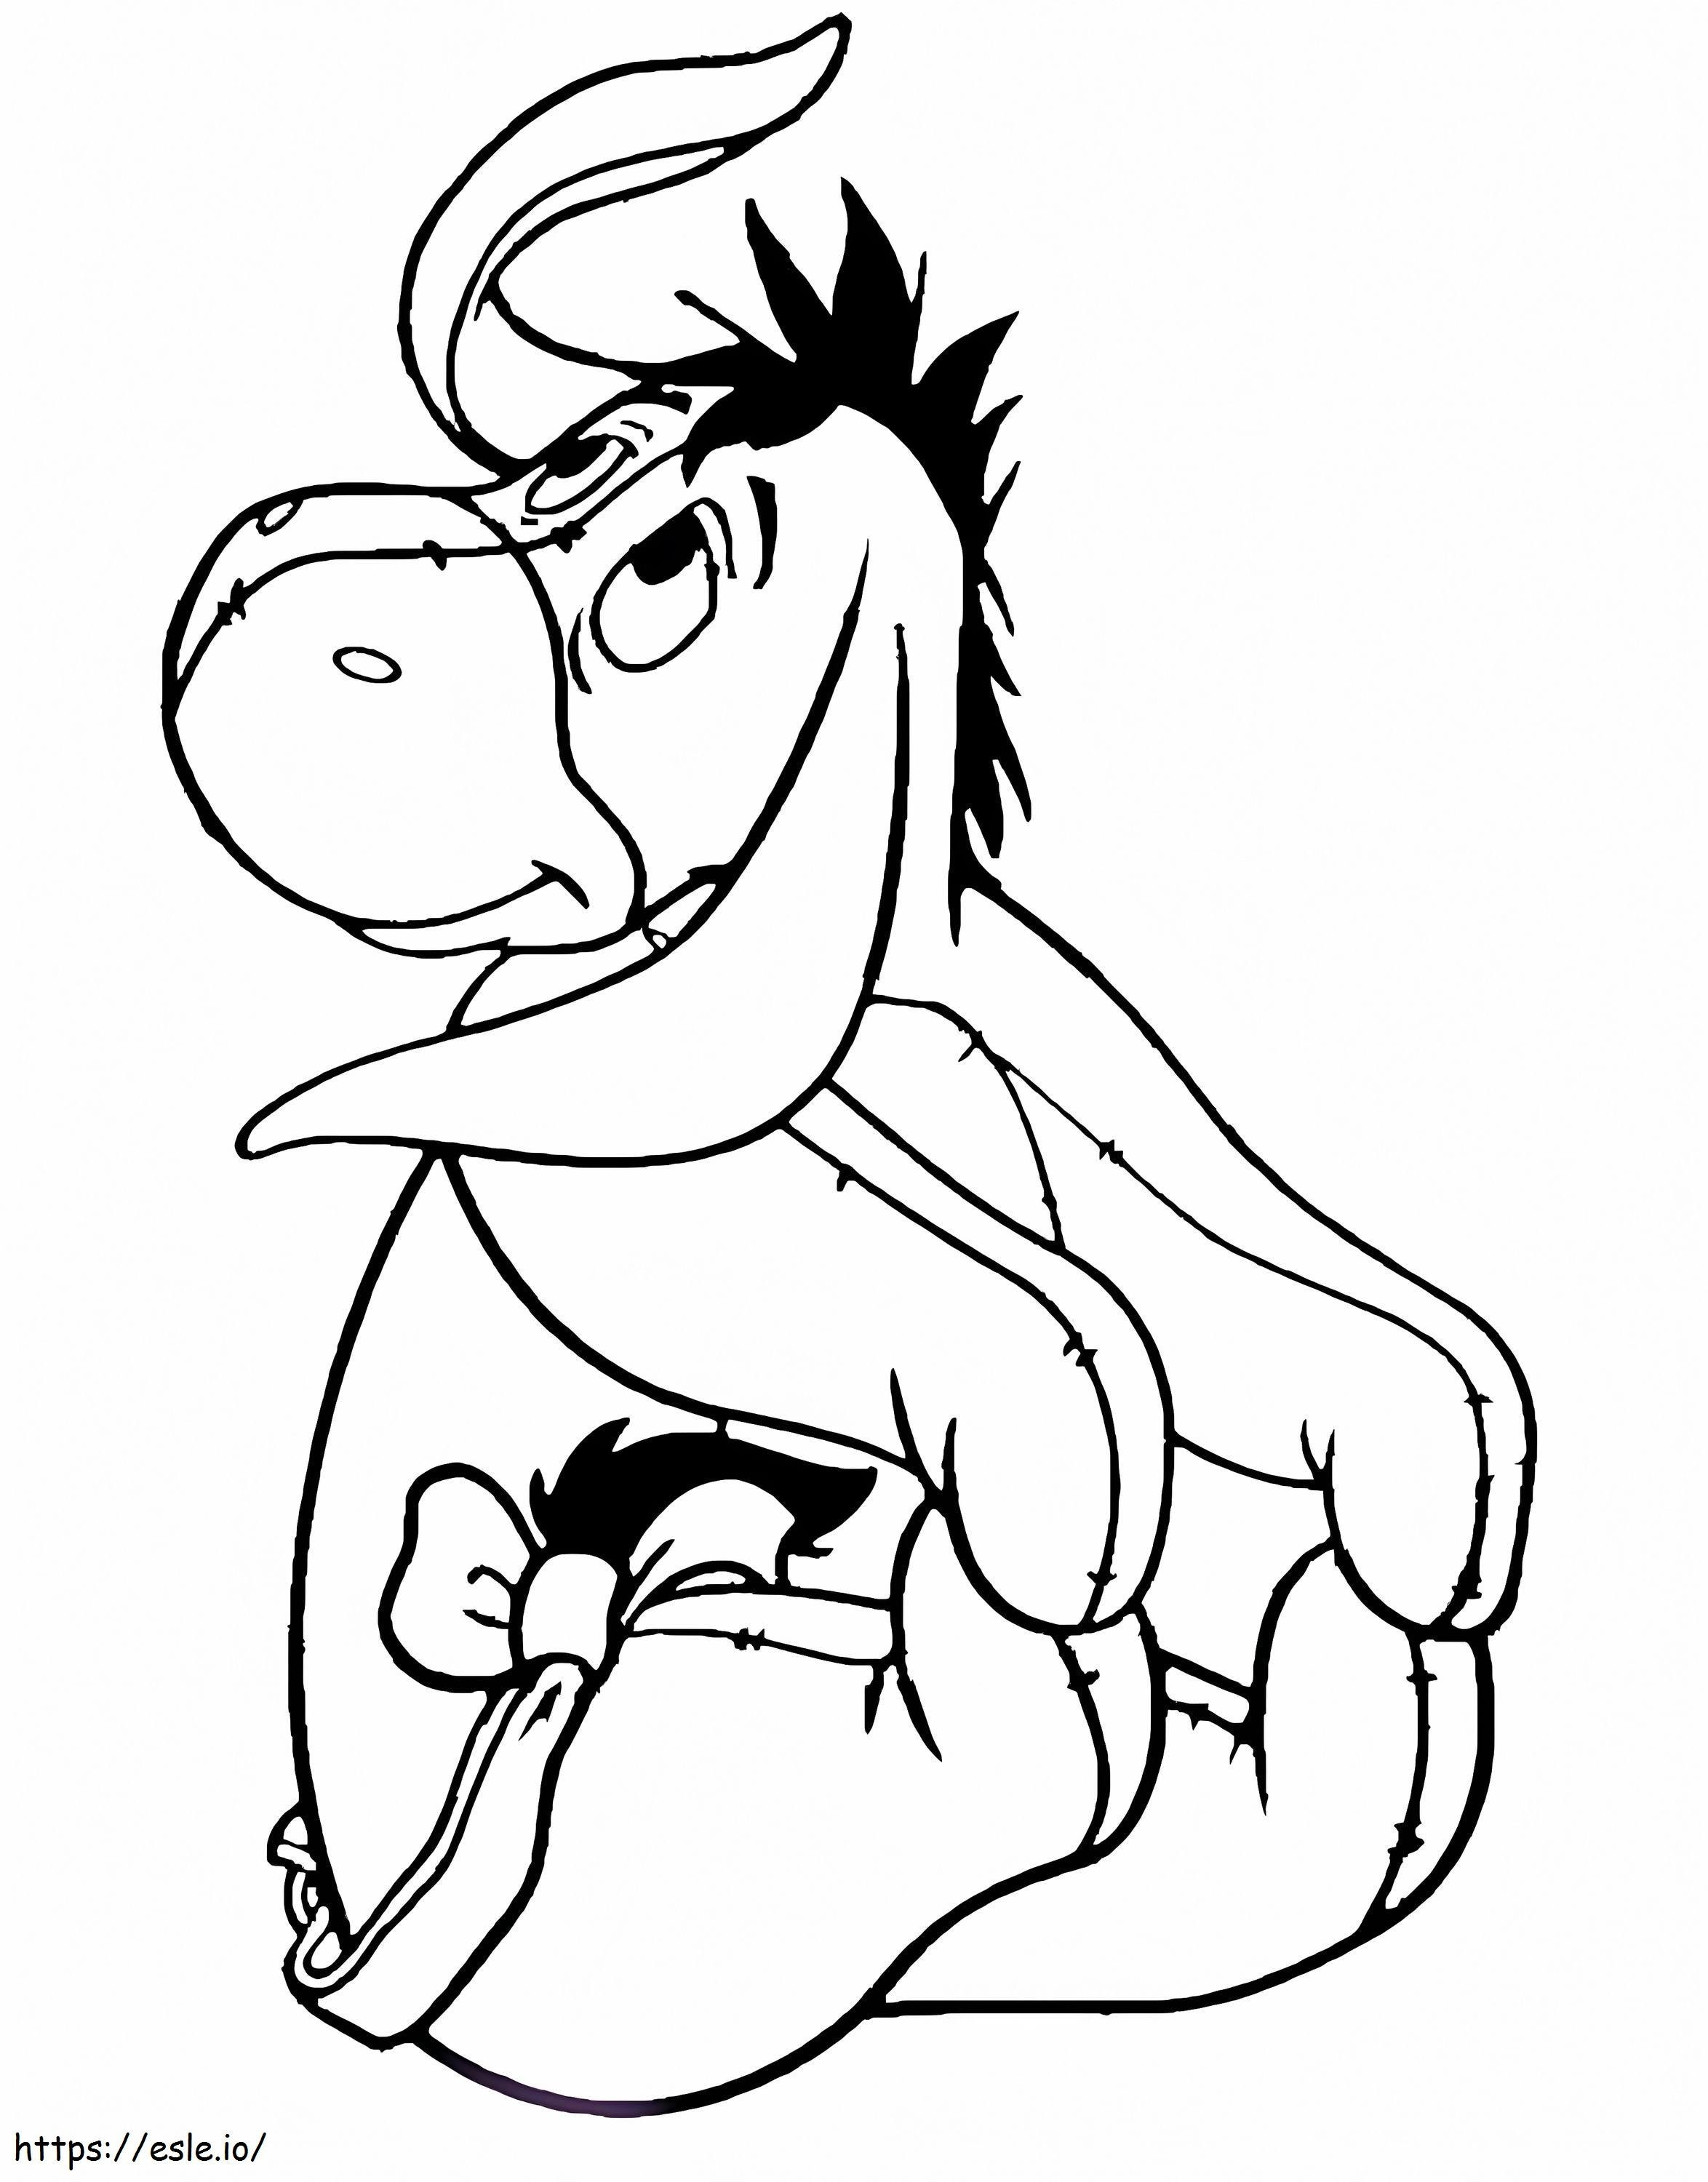 Awesome Eeyore coloring page